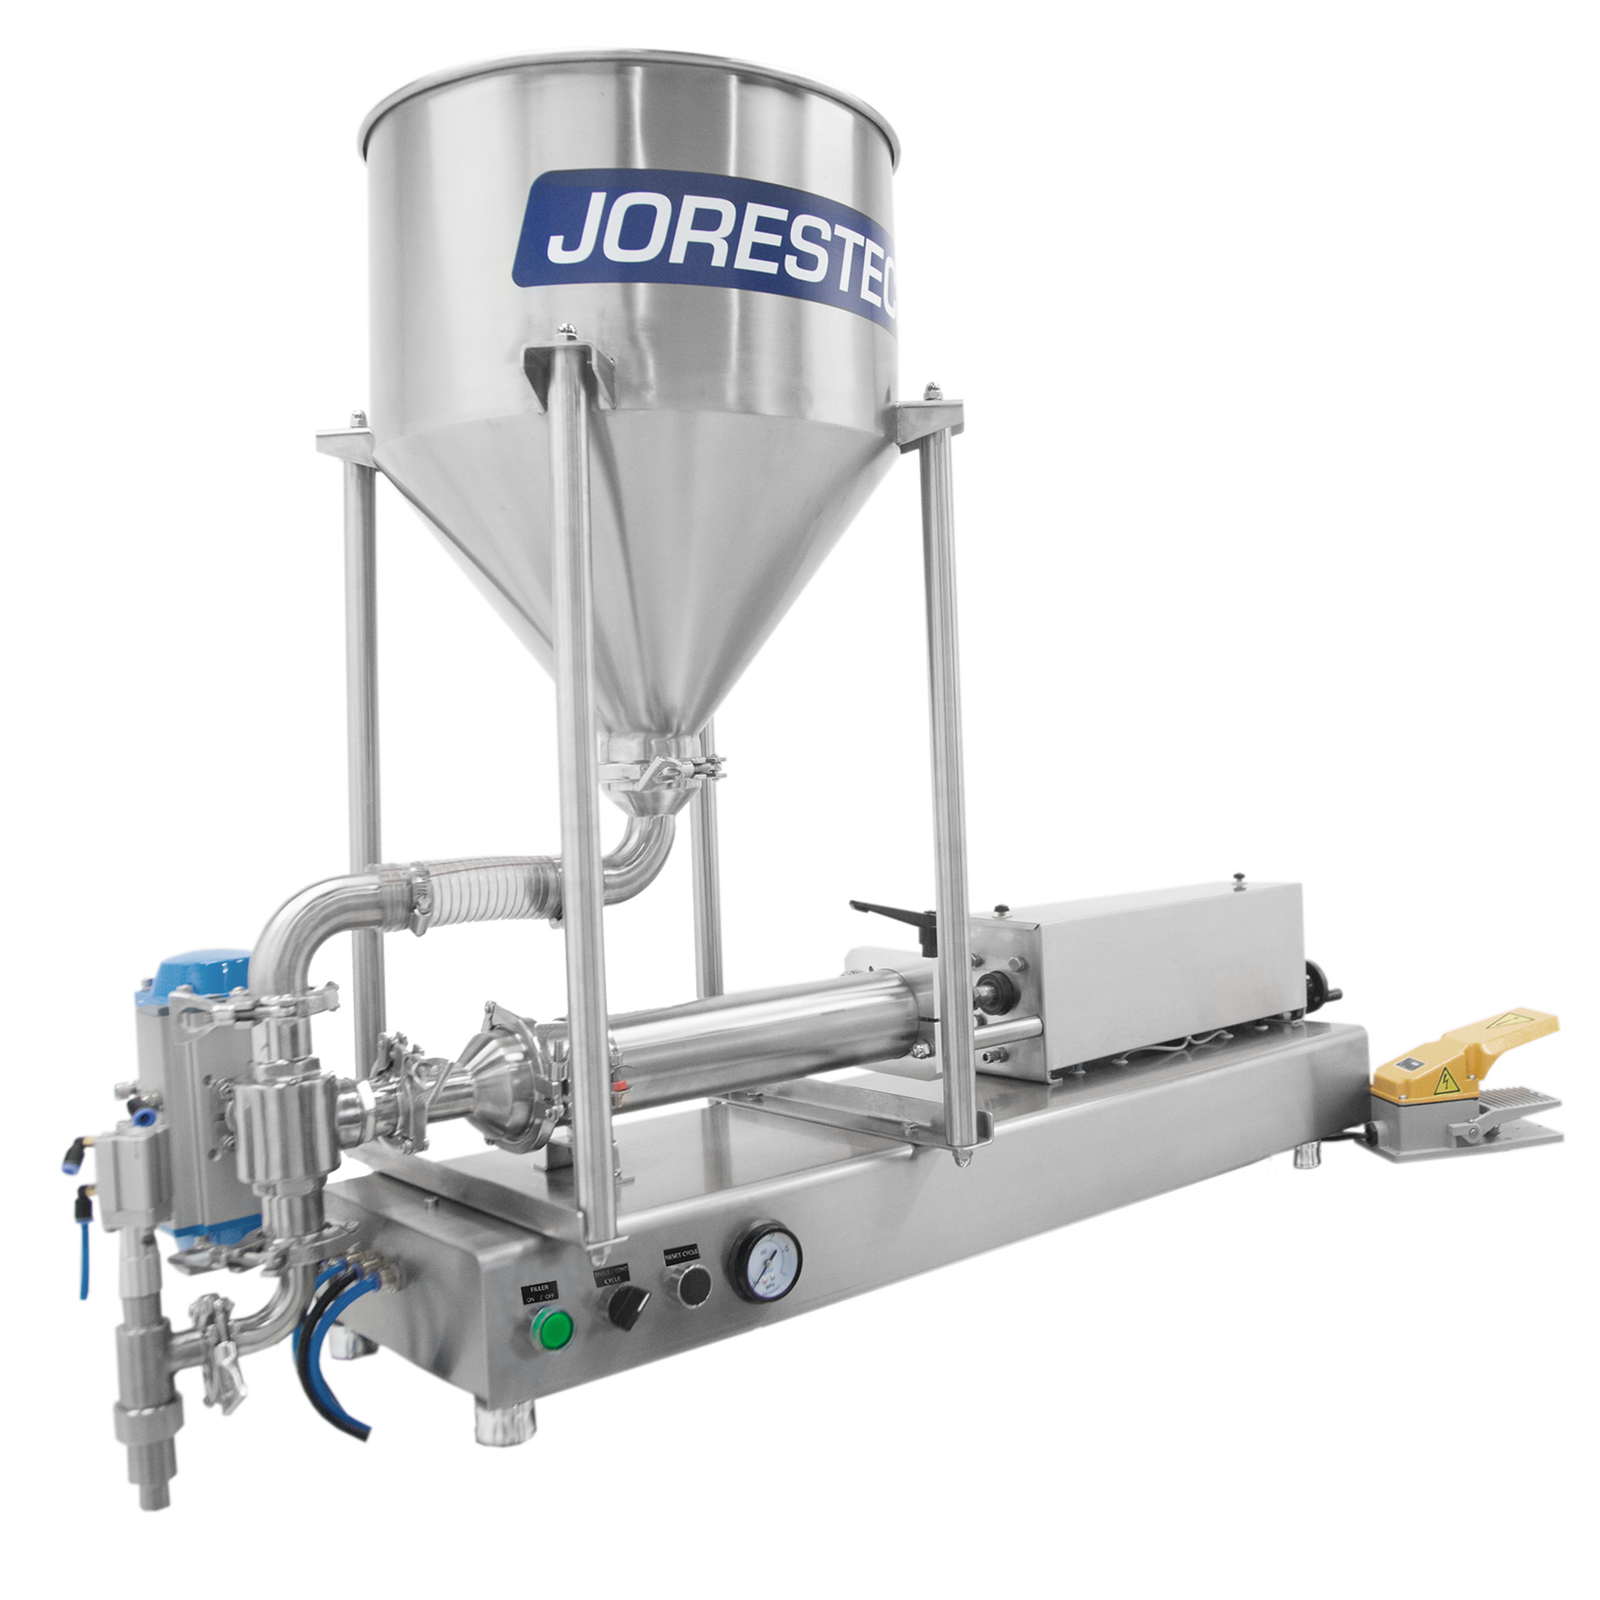 The JORES TECHNOLOGIES® High Viscosity tabletop piston filler with ball valve shown in a diagonal view